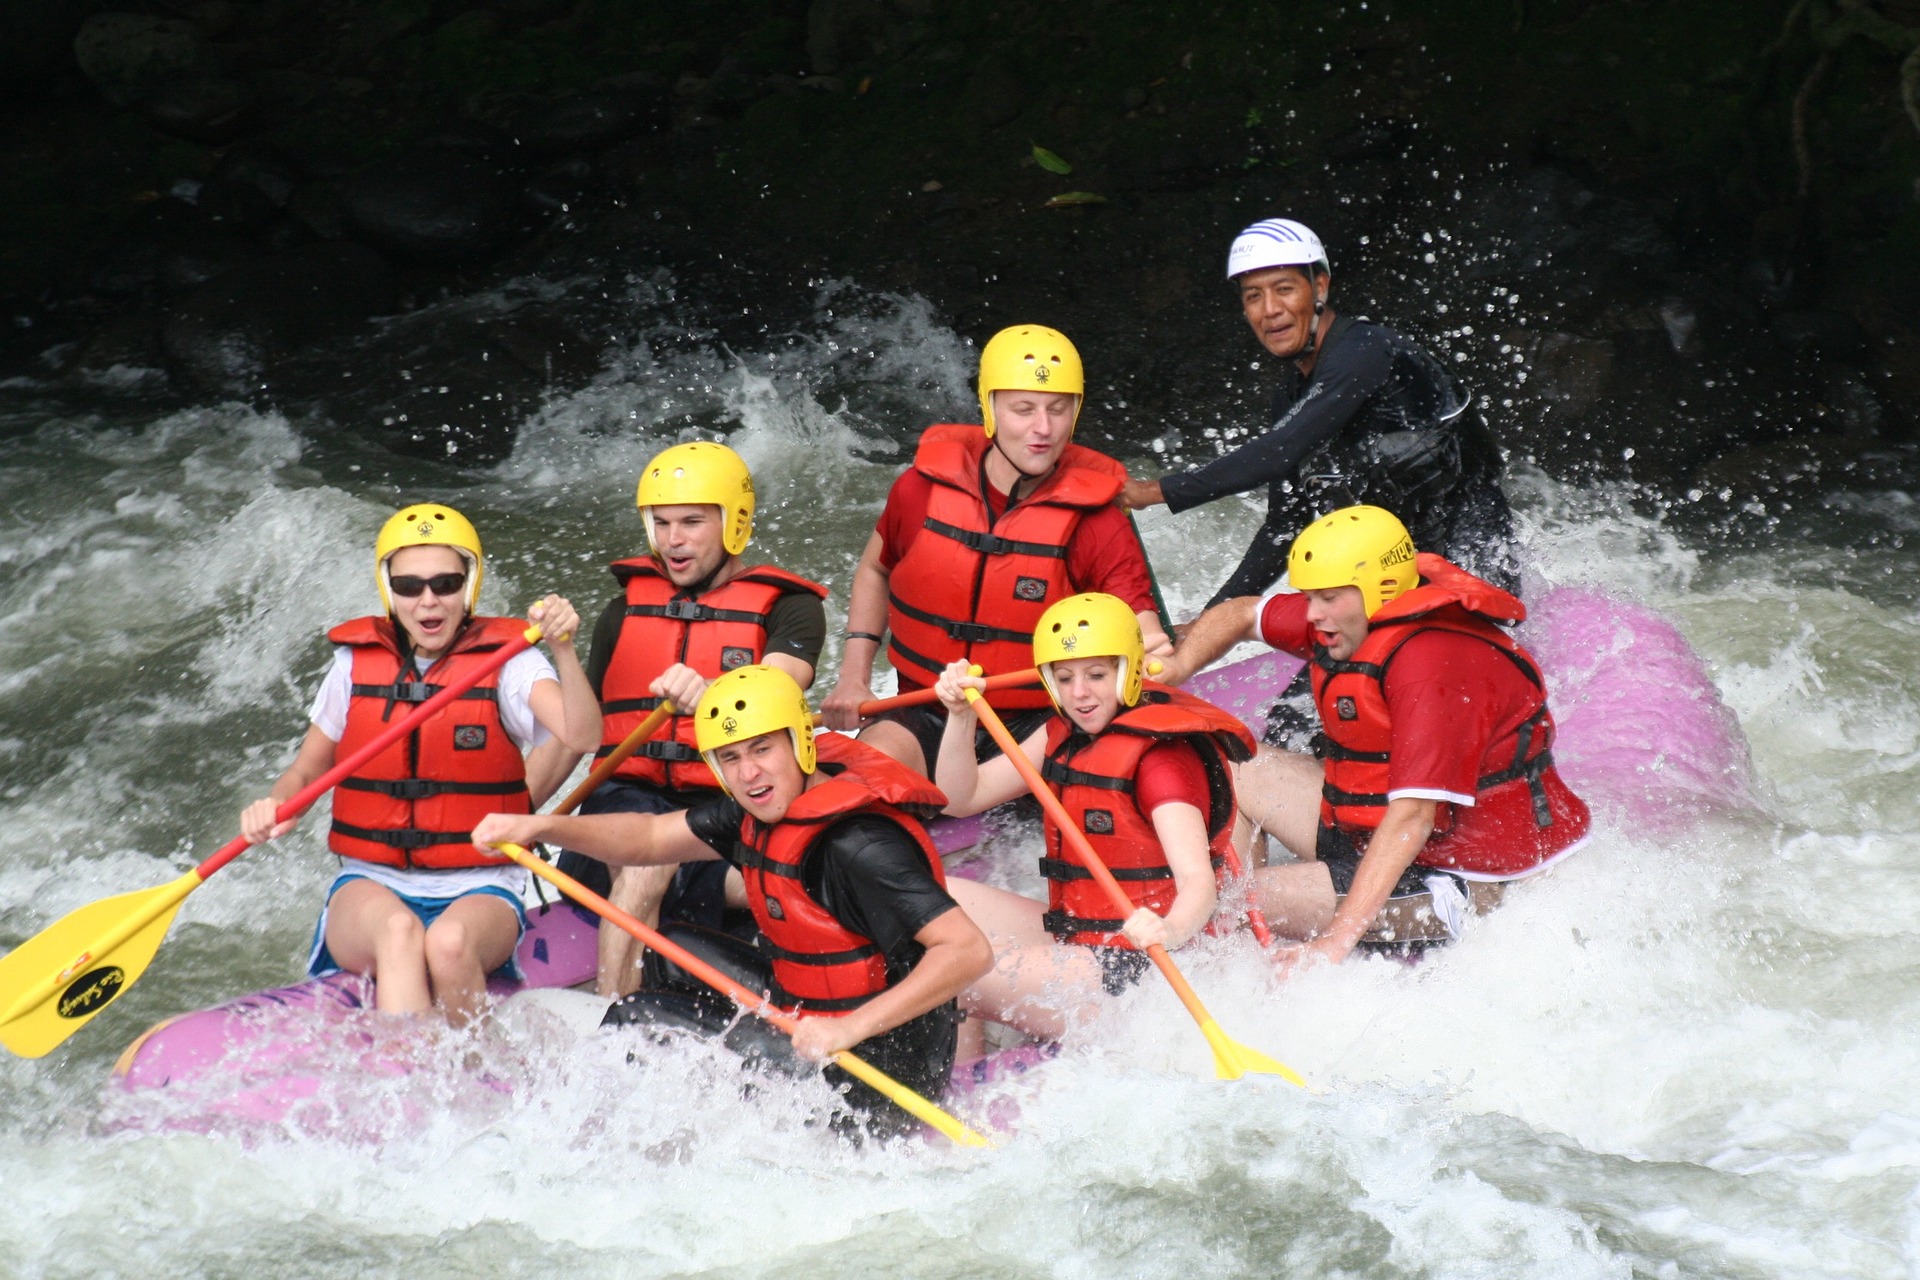 exciting like river rafting